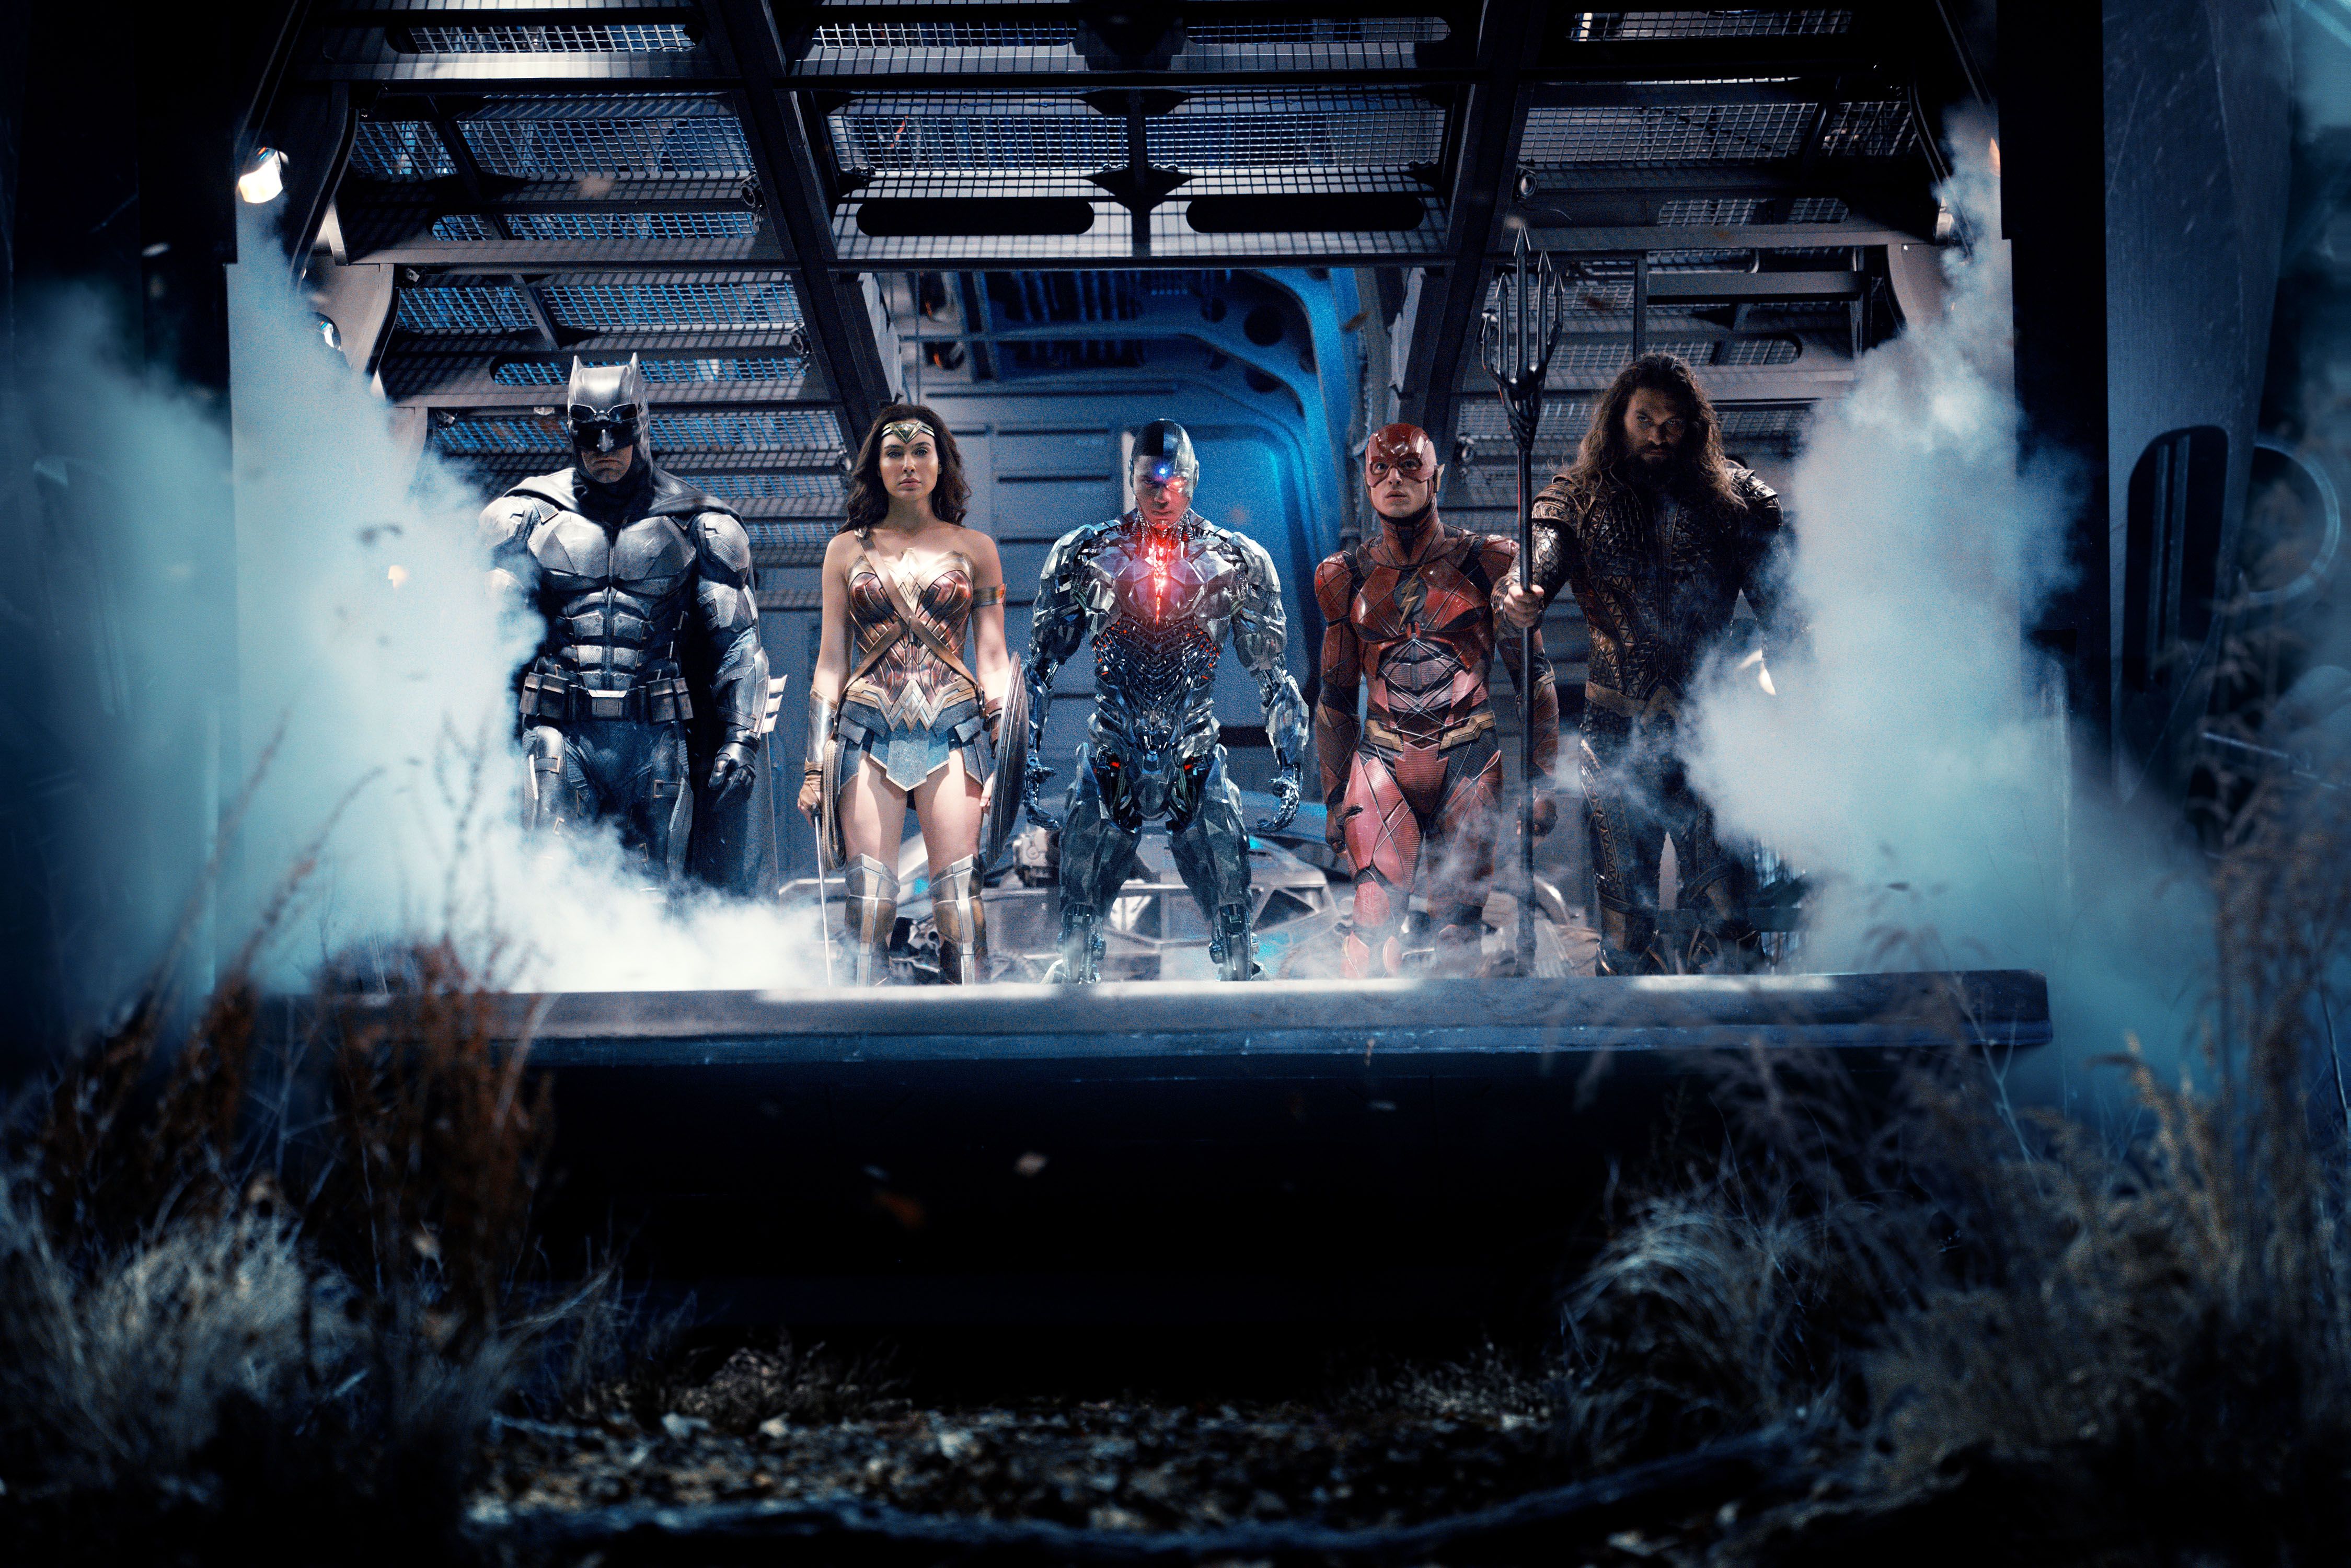 Zack Snyder's Justice League' Messy Superhero Epic Out Now on Digital - CNET